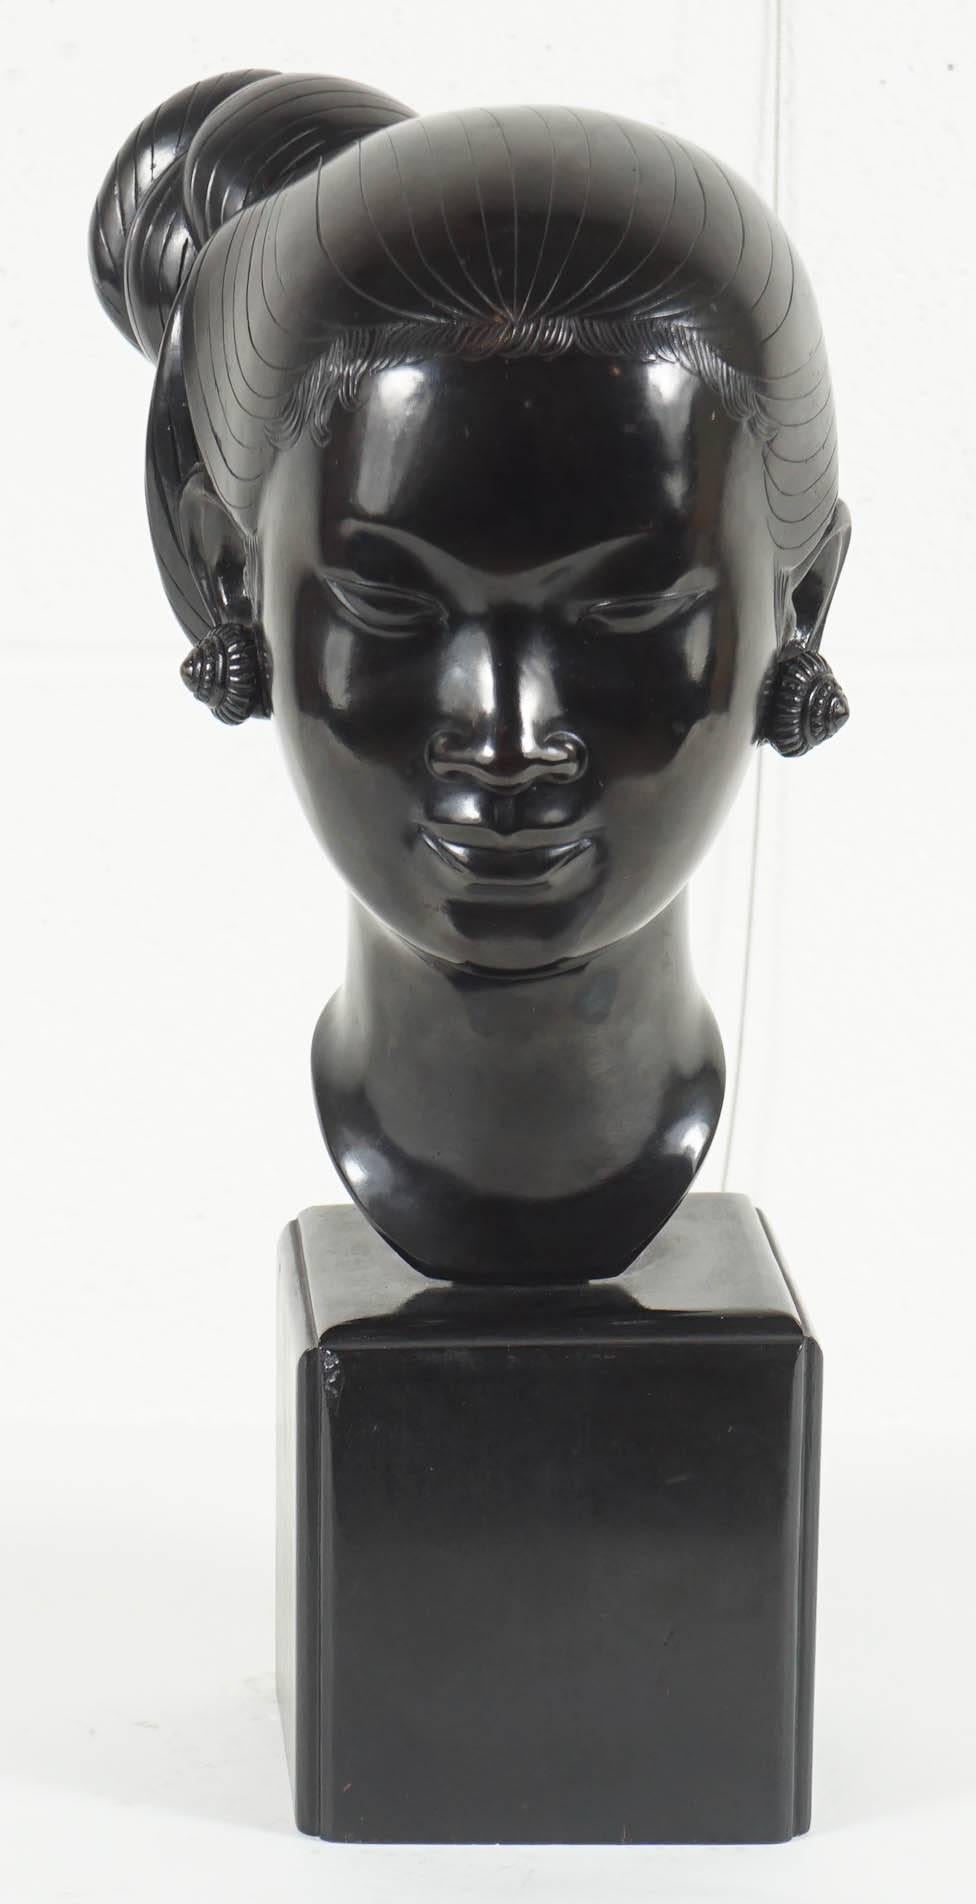 Here is a beautiful bronze sculpture of an Asian girl mounted on a solid black lacquered wood base. This piece has a highly stylized design with contour lines throughout for detail. There is an incised maker mark in the bronze on the back.